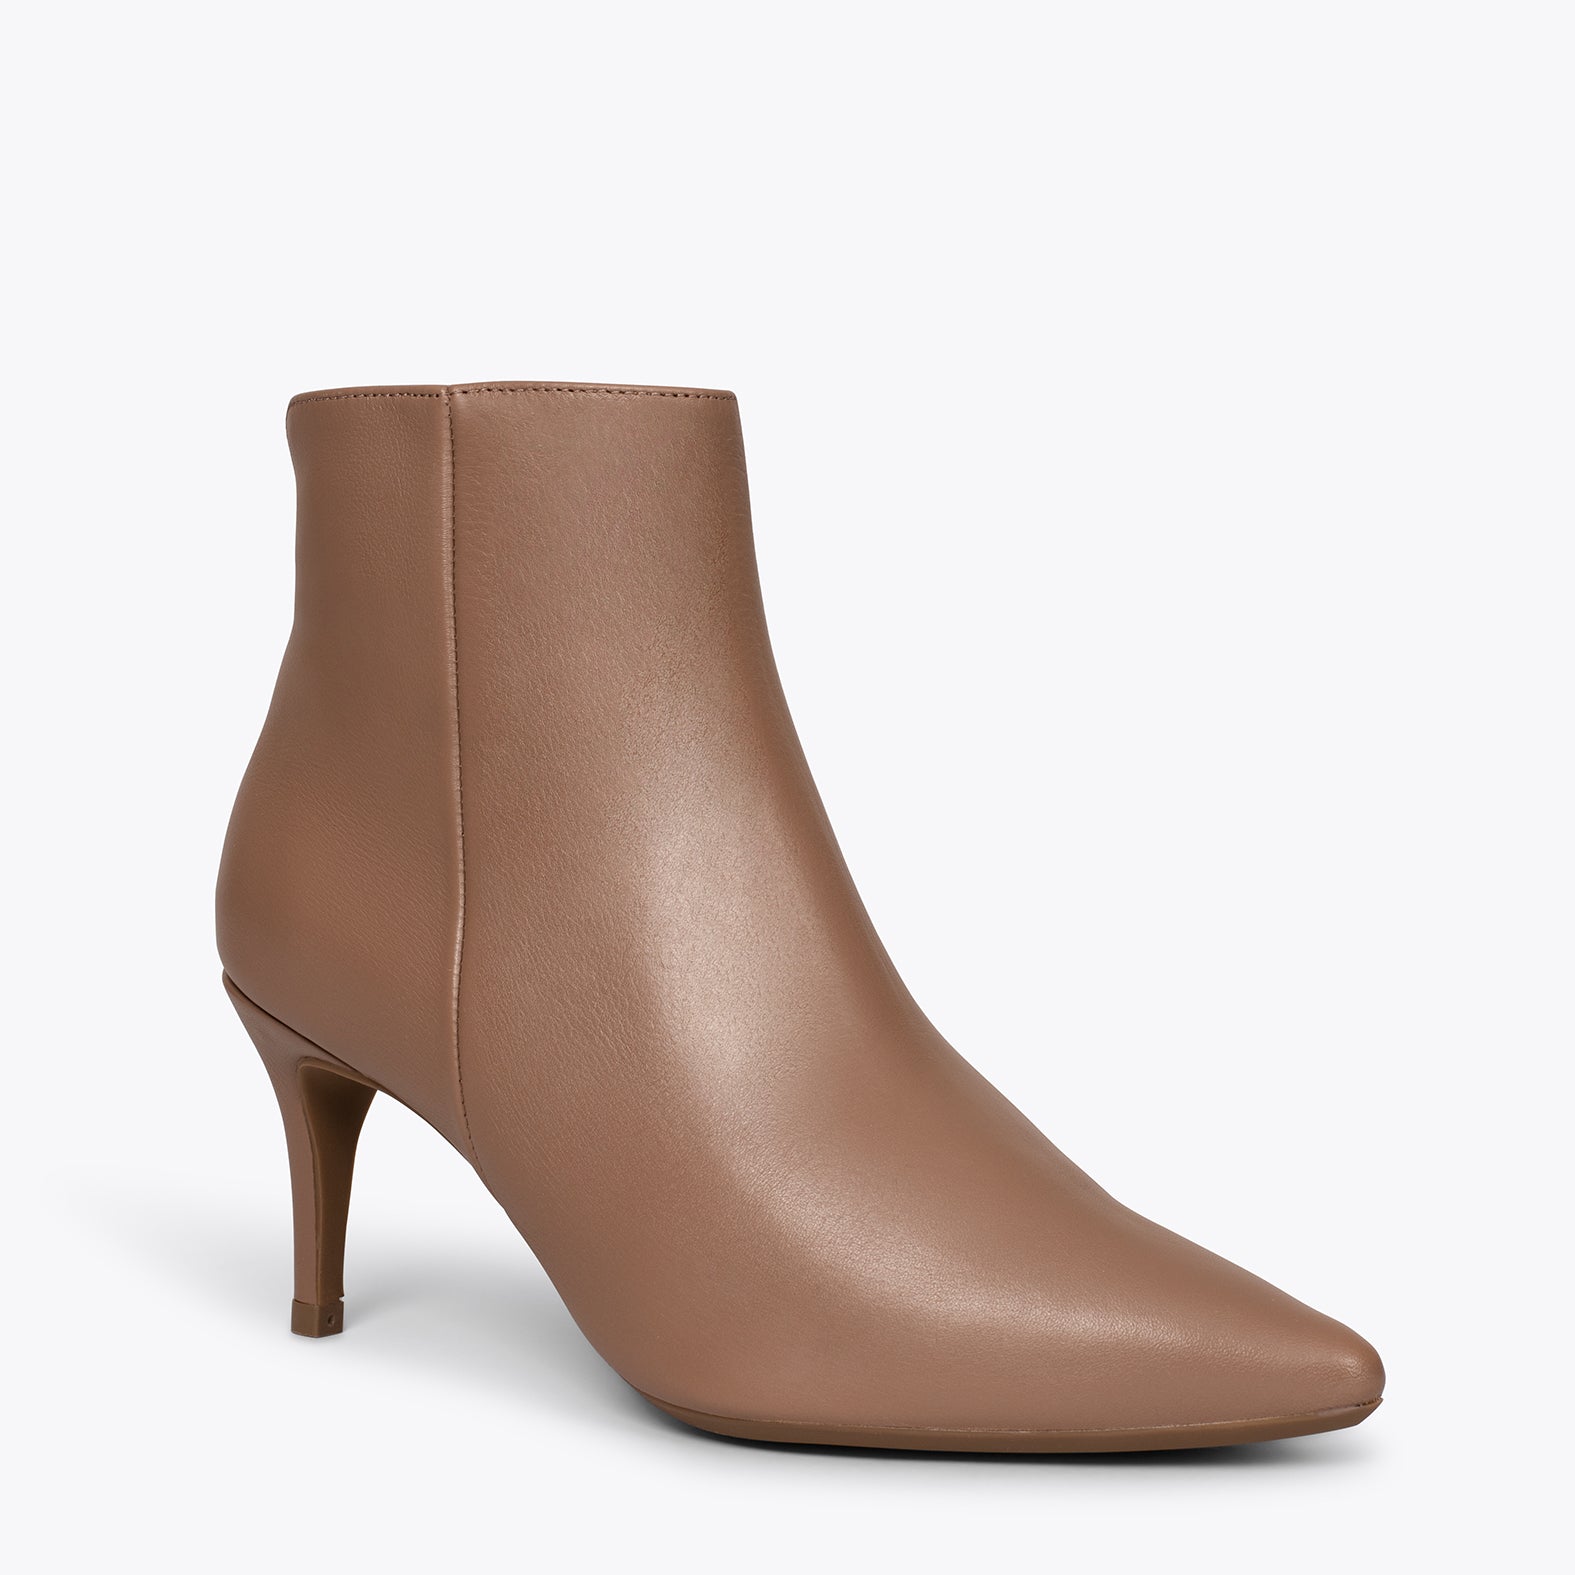 OUTFIT – MAKE UP suede high heel bootie